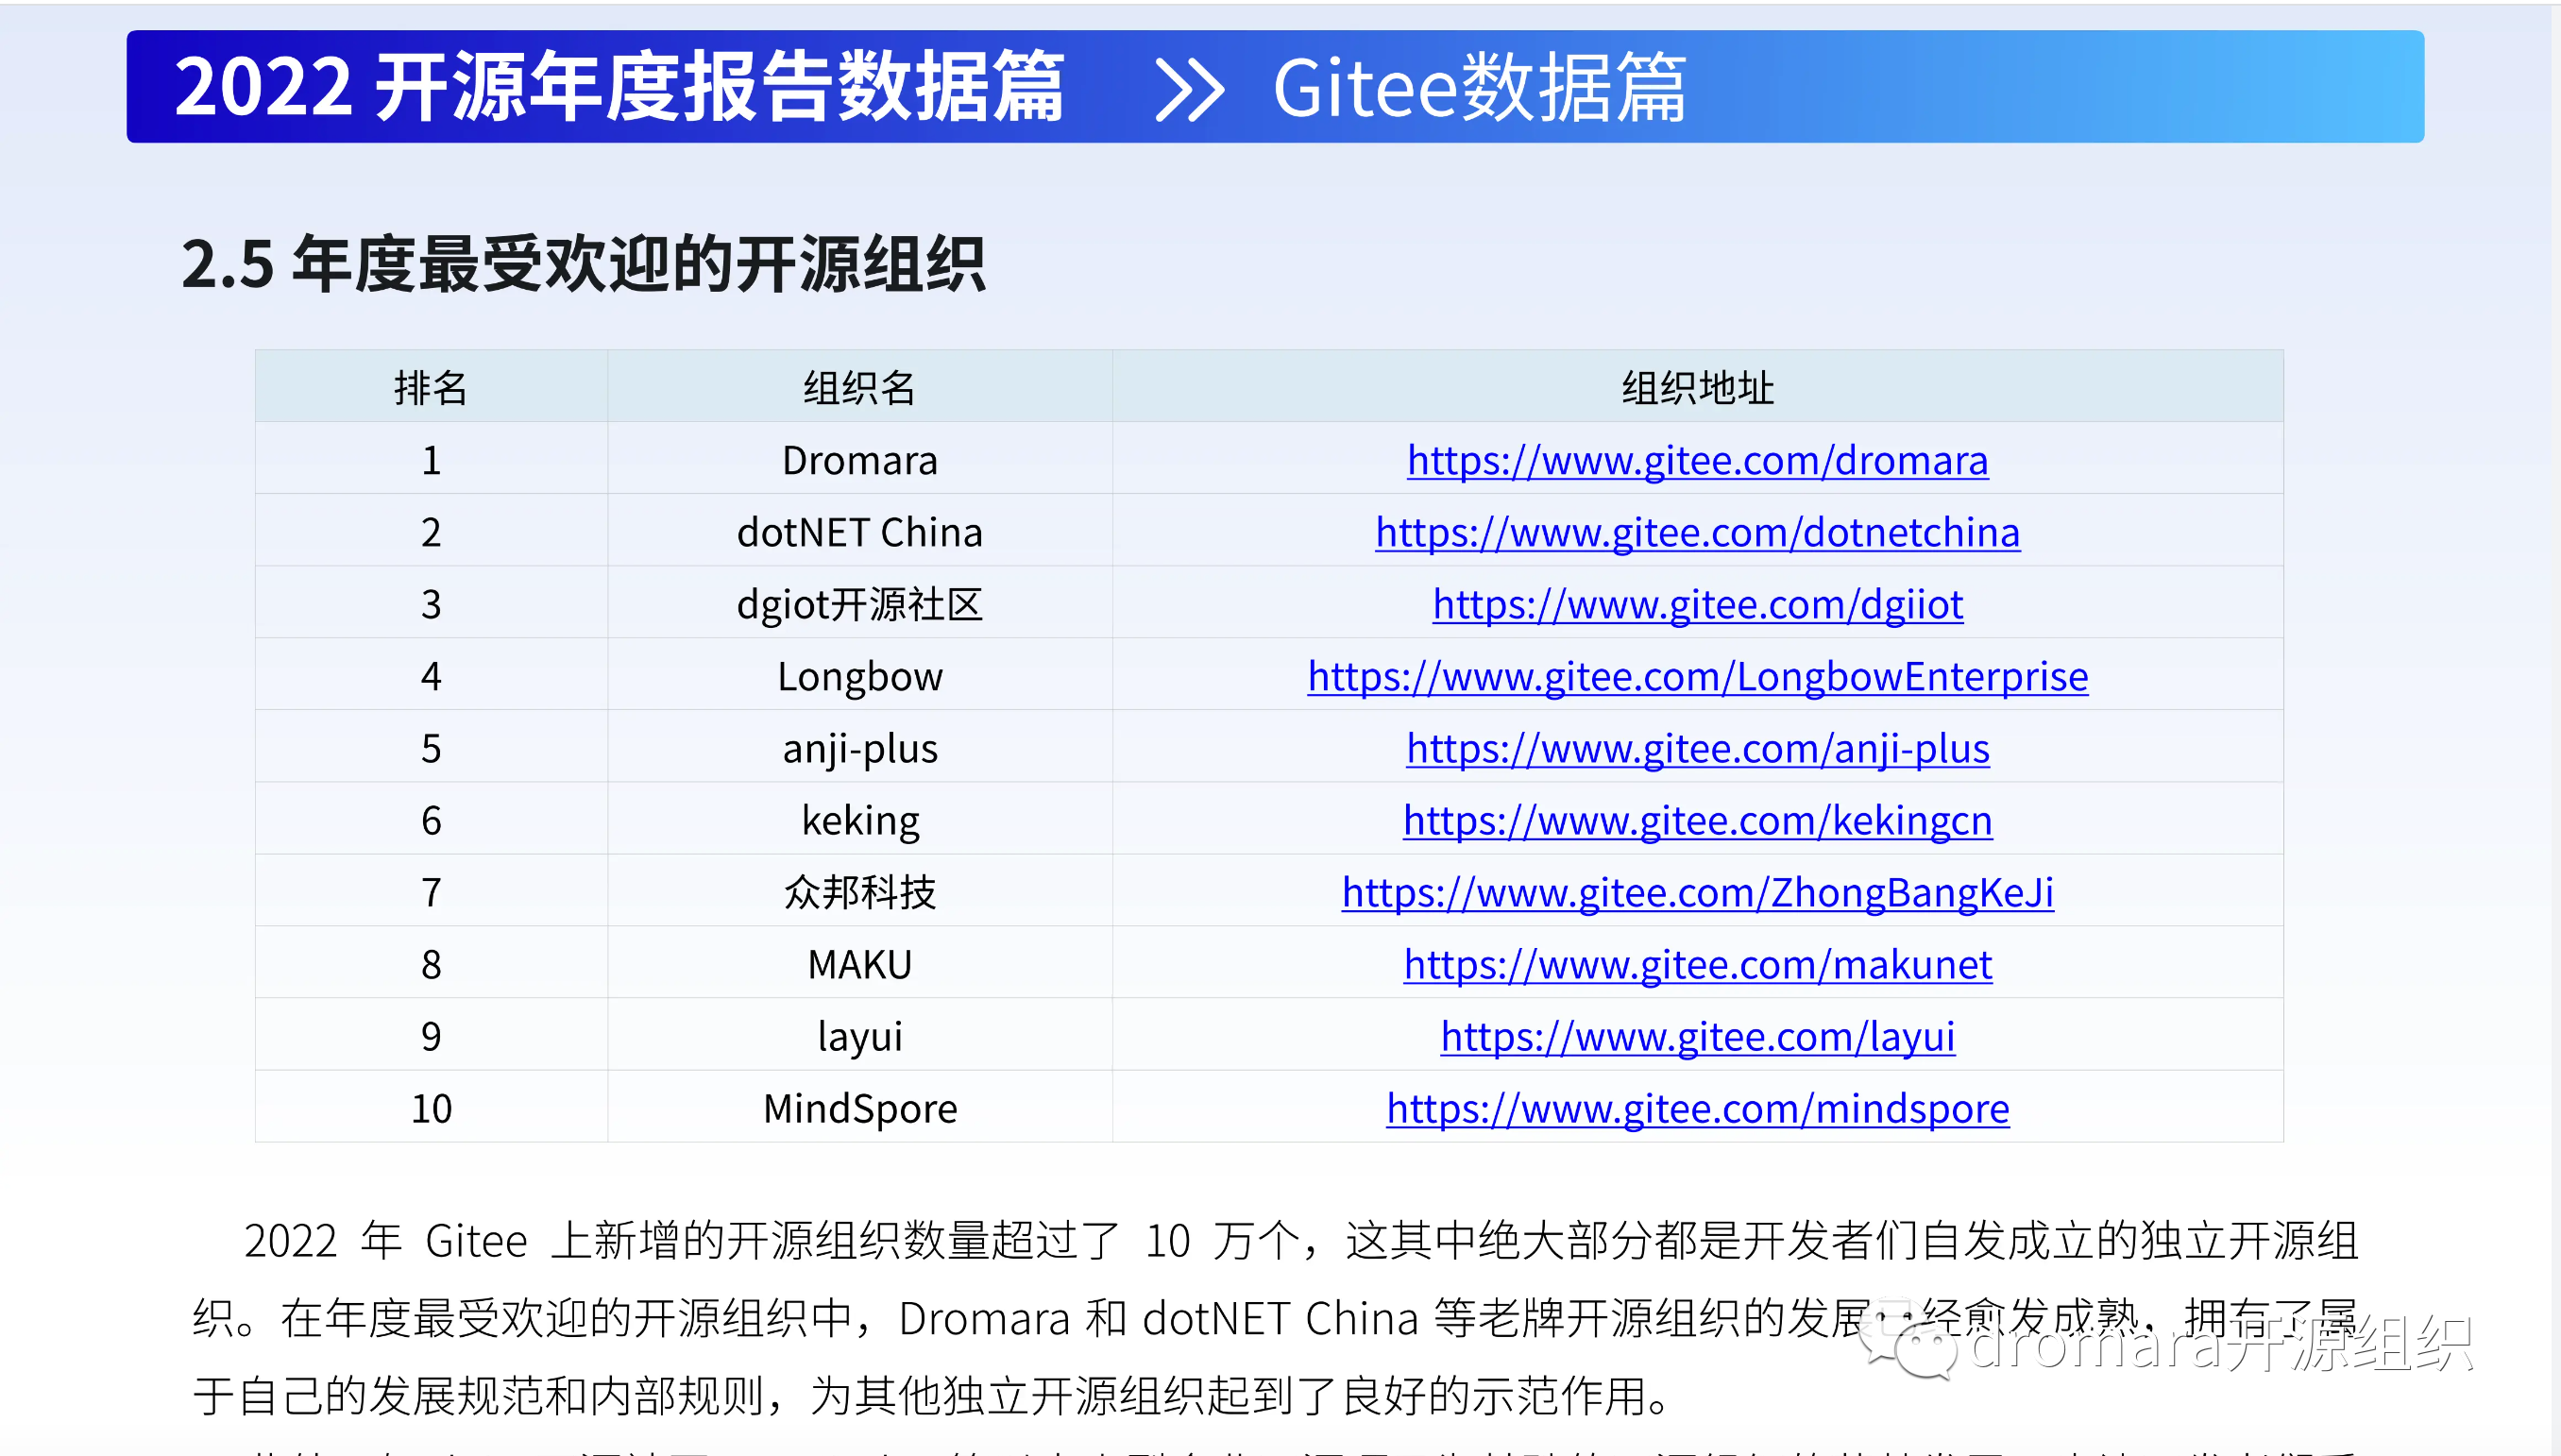 2022 Open Source Community - China Open Source Annual Report awarded Most Popular Open Source Organization